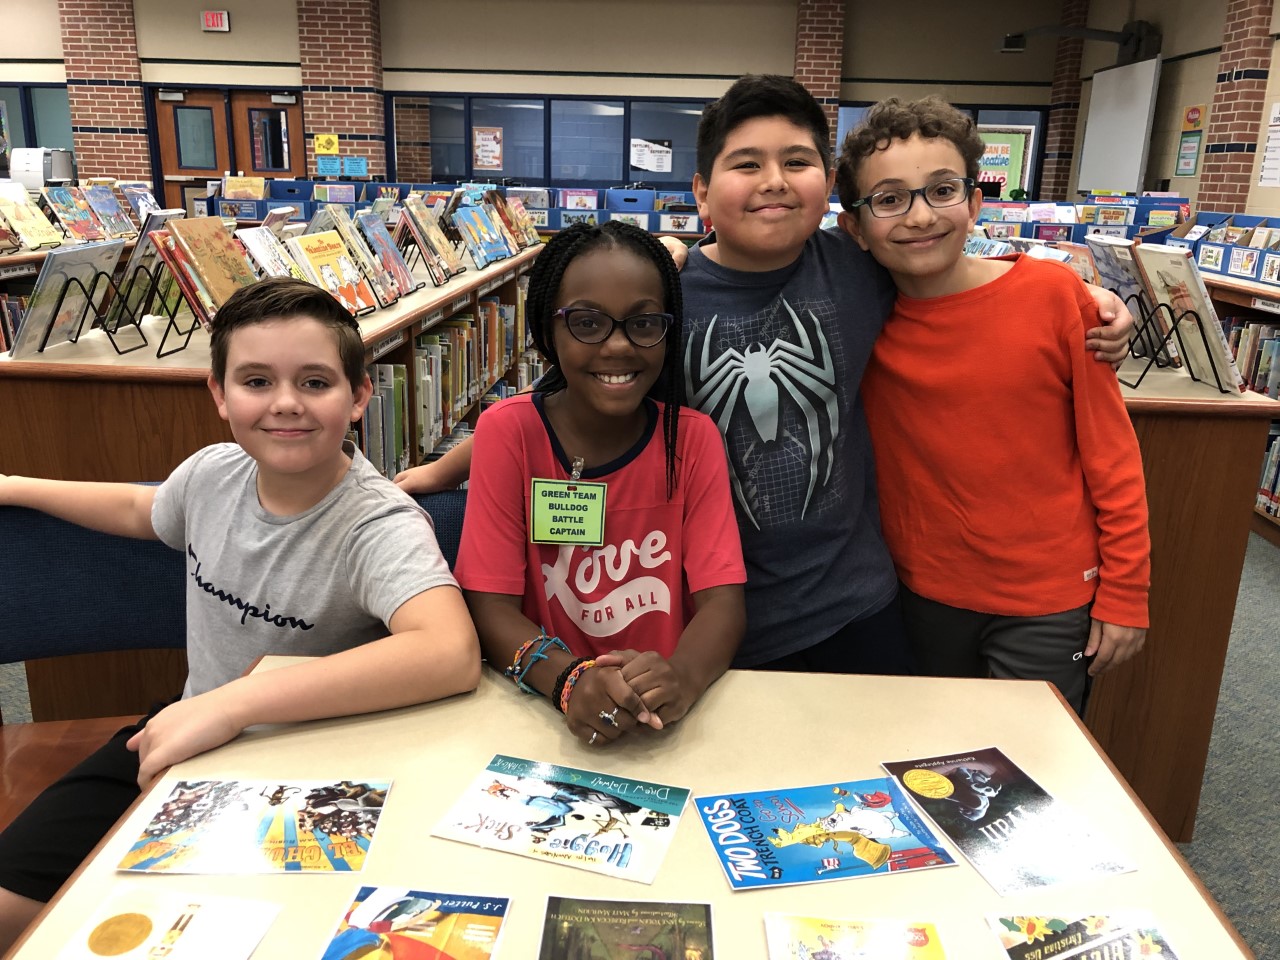 "four students smile for the camera in a school library"